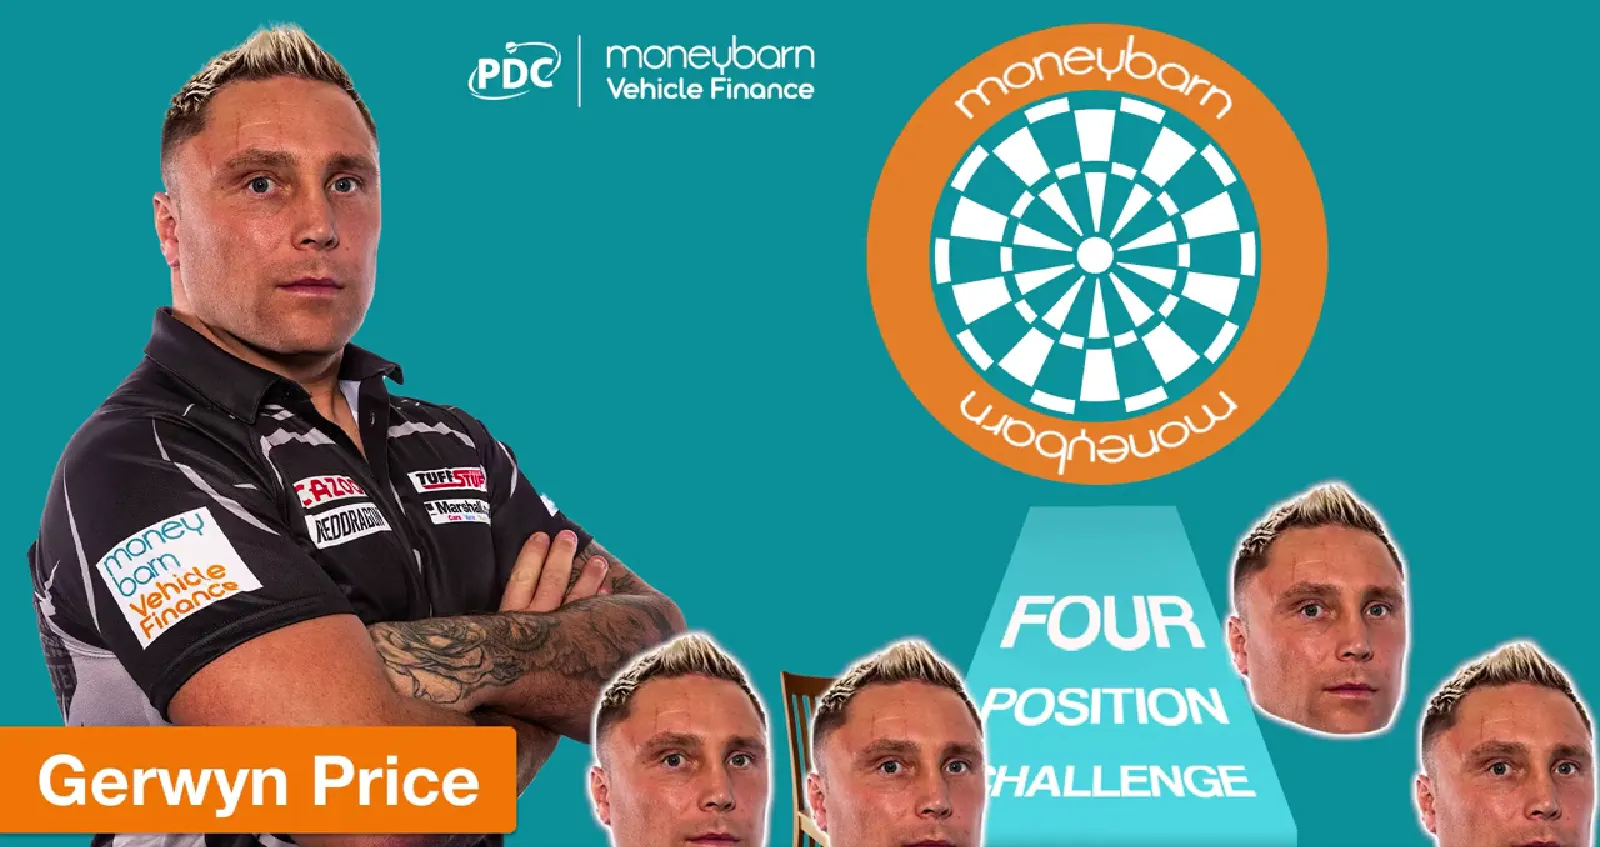 2022 11 23 20 48 06 PDC Darts on Twitter  GP is next up to tackle the @MoneybarnUK four s